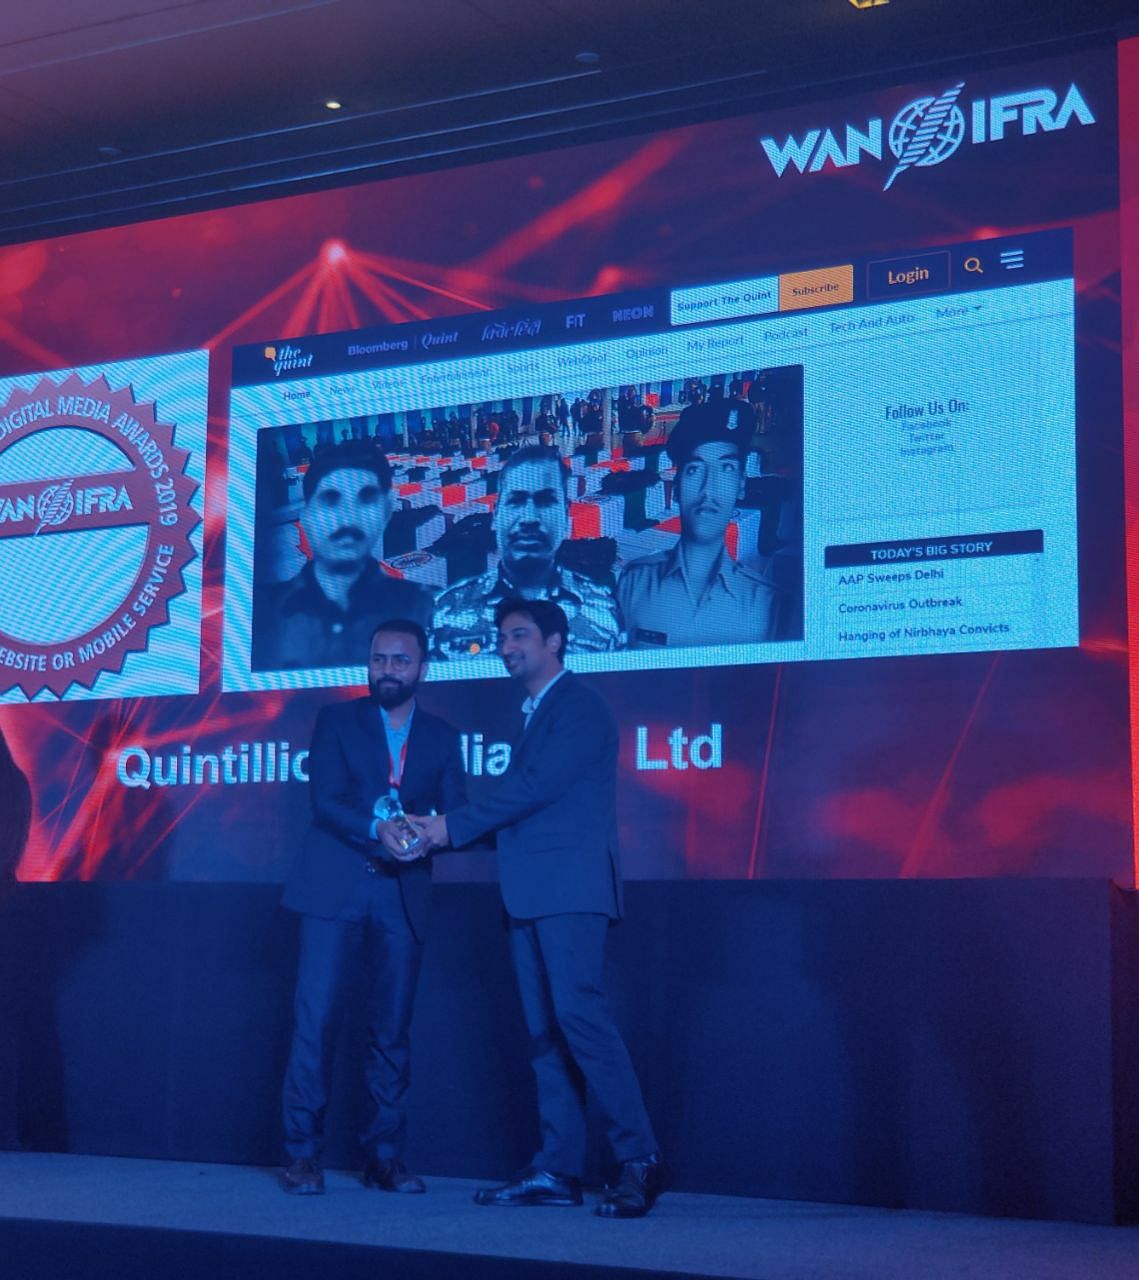 The Quint also won bronze for the ‘Best News Website or Mobile Service’ category.